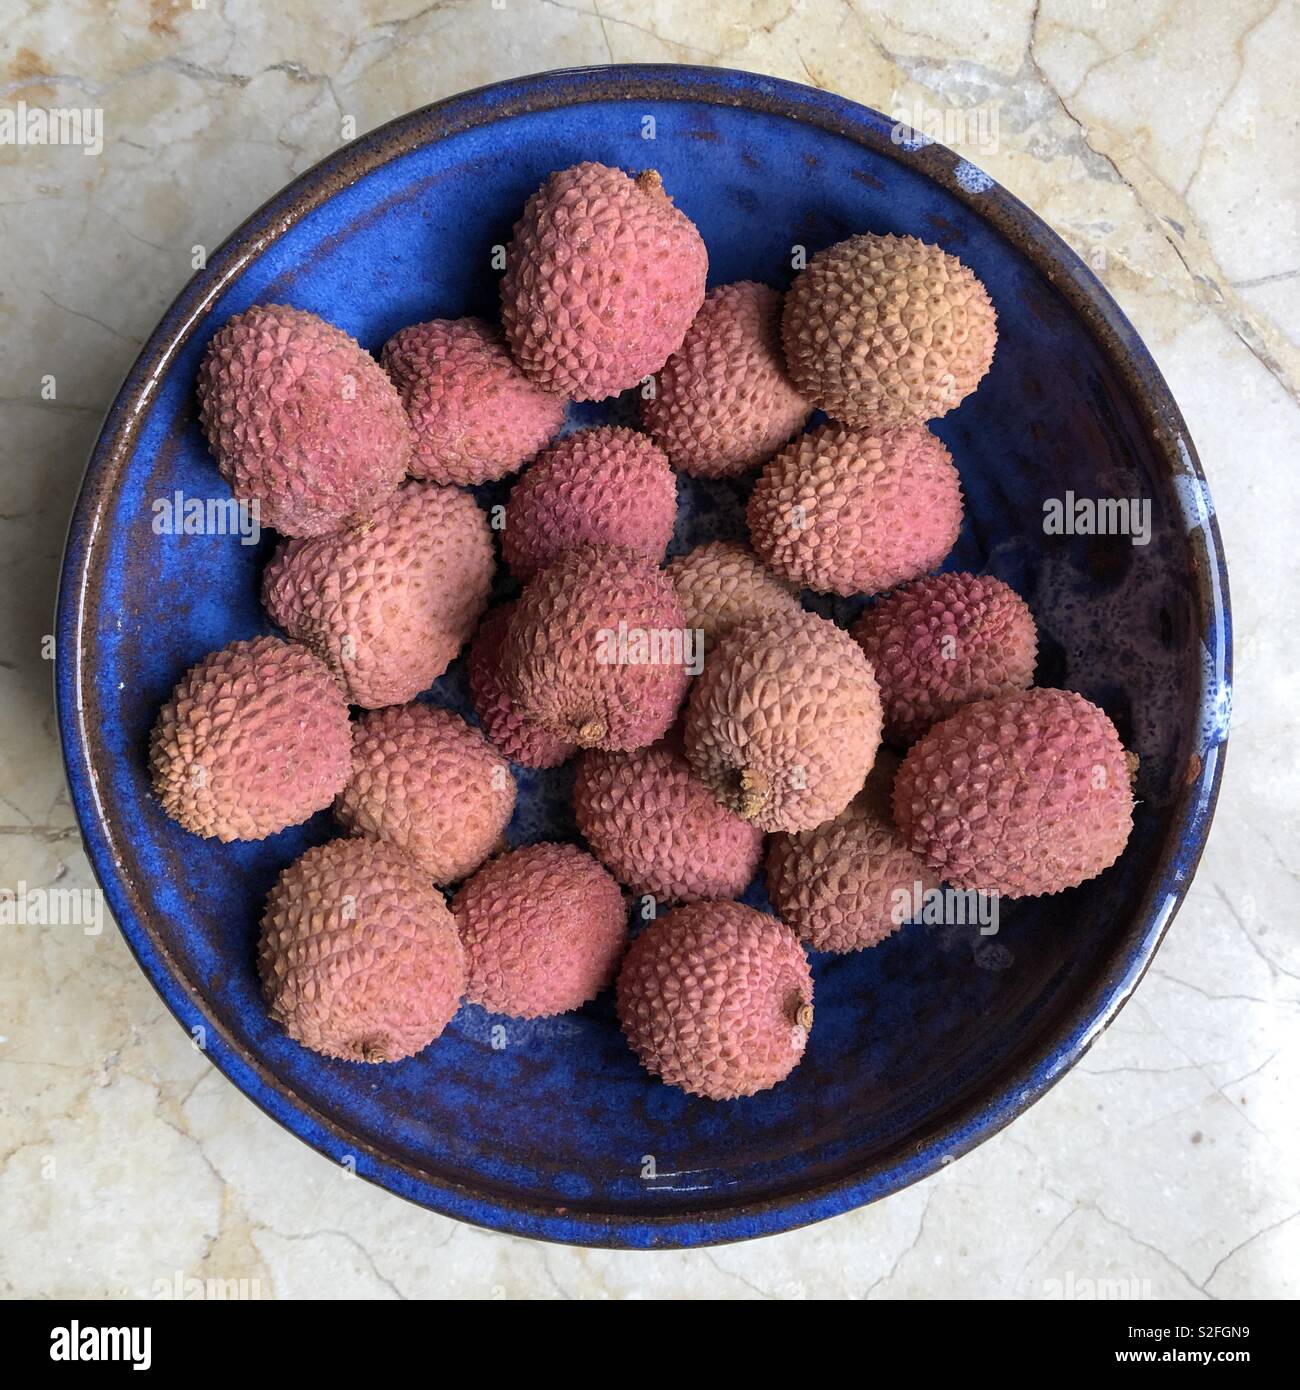 Lychees in a blue ceramic bowl on marble Stock Photo